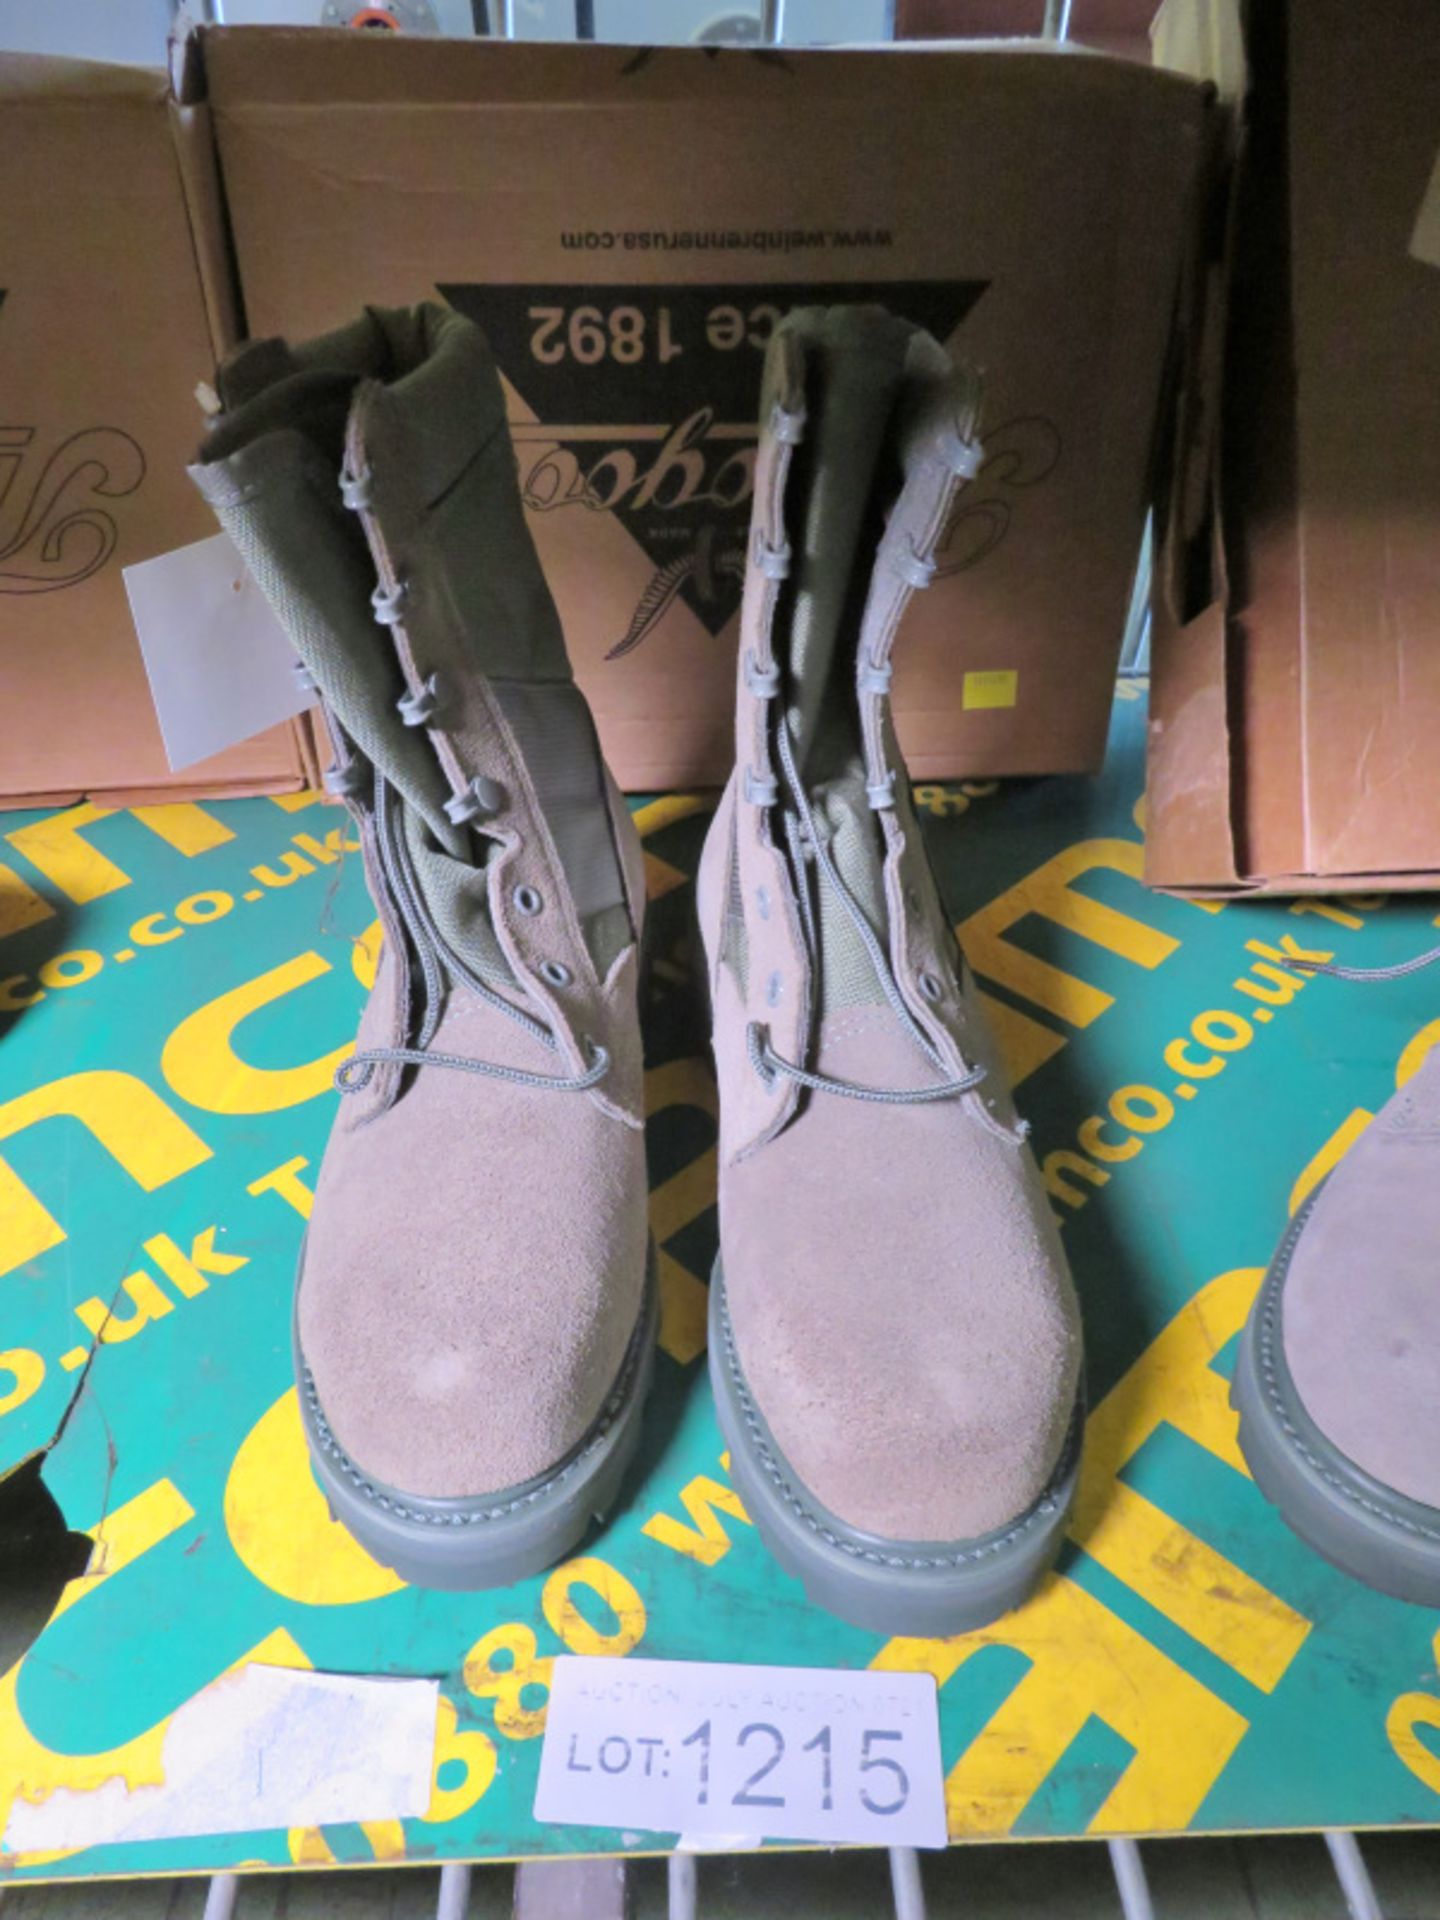 3x Pairs Hot Weather Boots (7 R - Sage x2 & 6 R - Sage) - Image 4 of 7